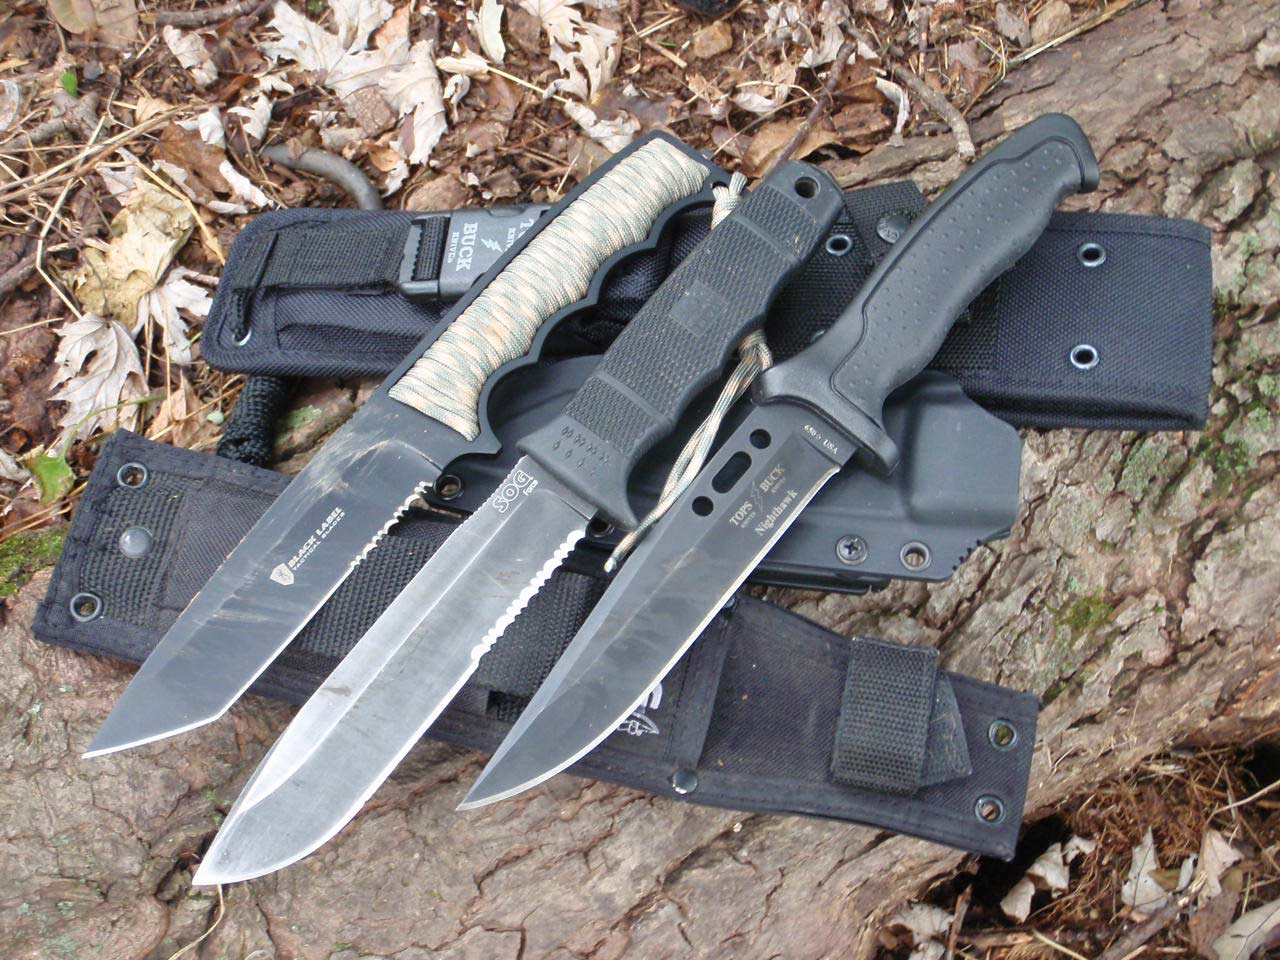 A trio of knives on a rock.